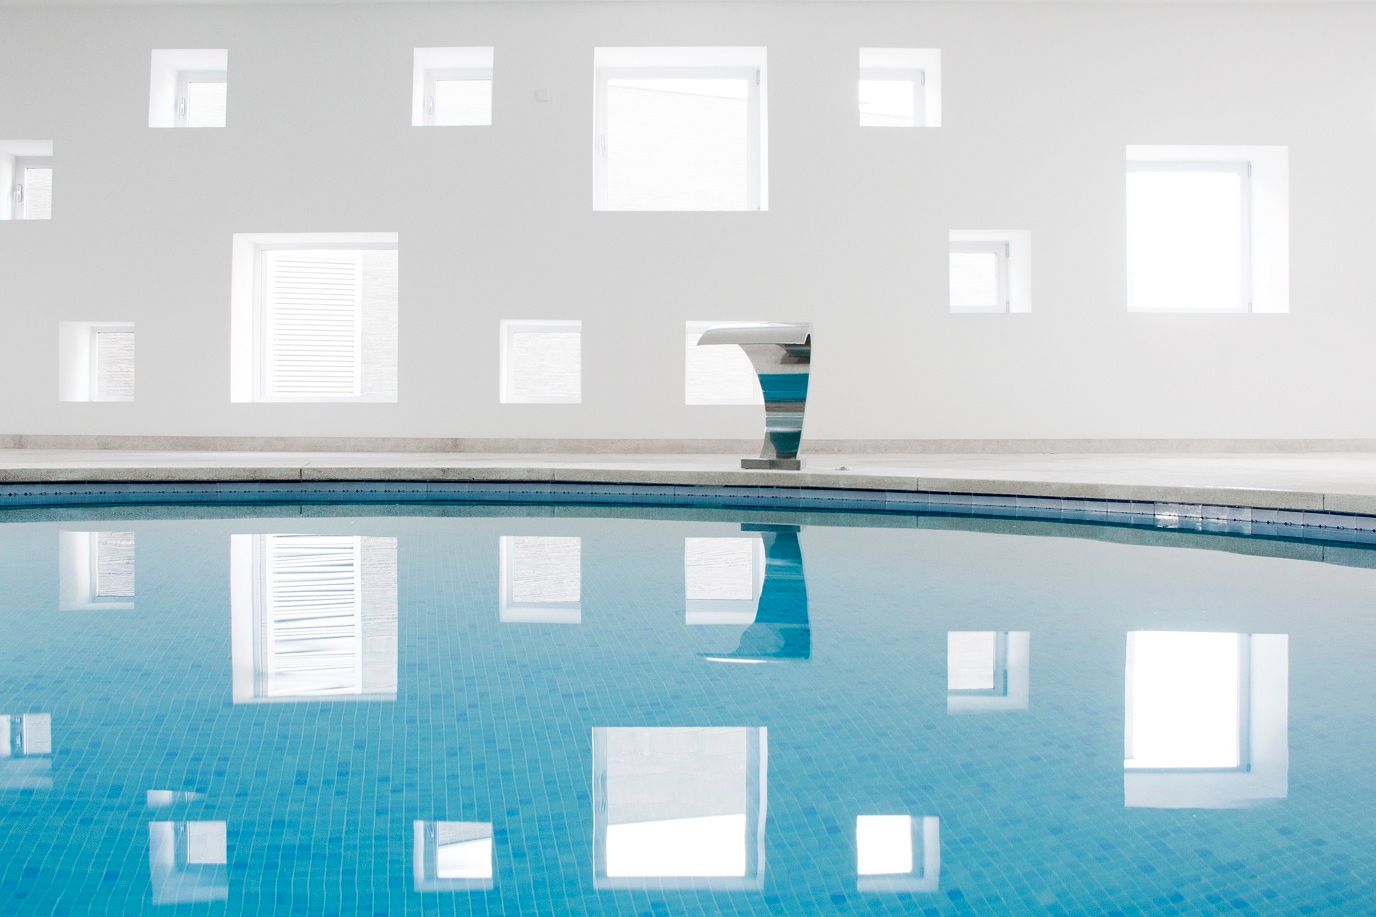 Pool and spa area for an Hotel , A2arquitectos A2arquitectos Minimalistischer Spa